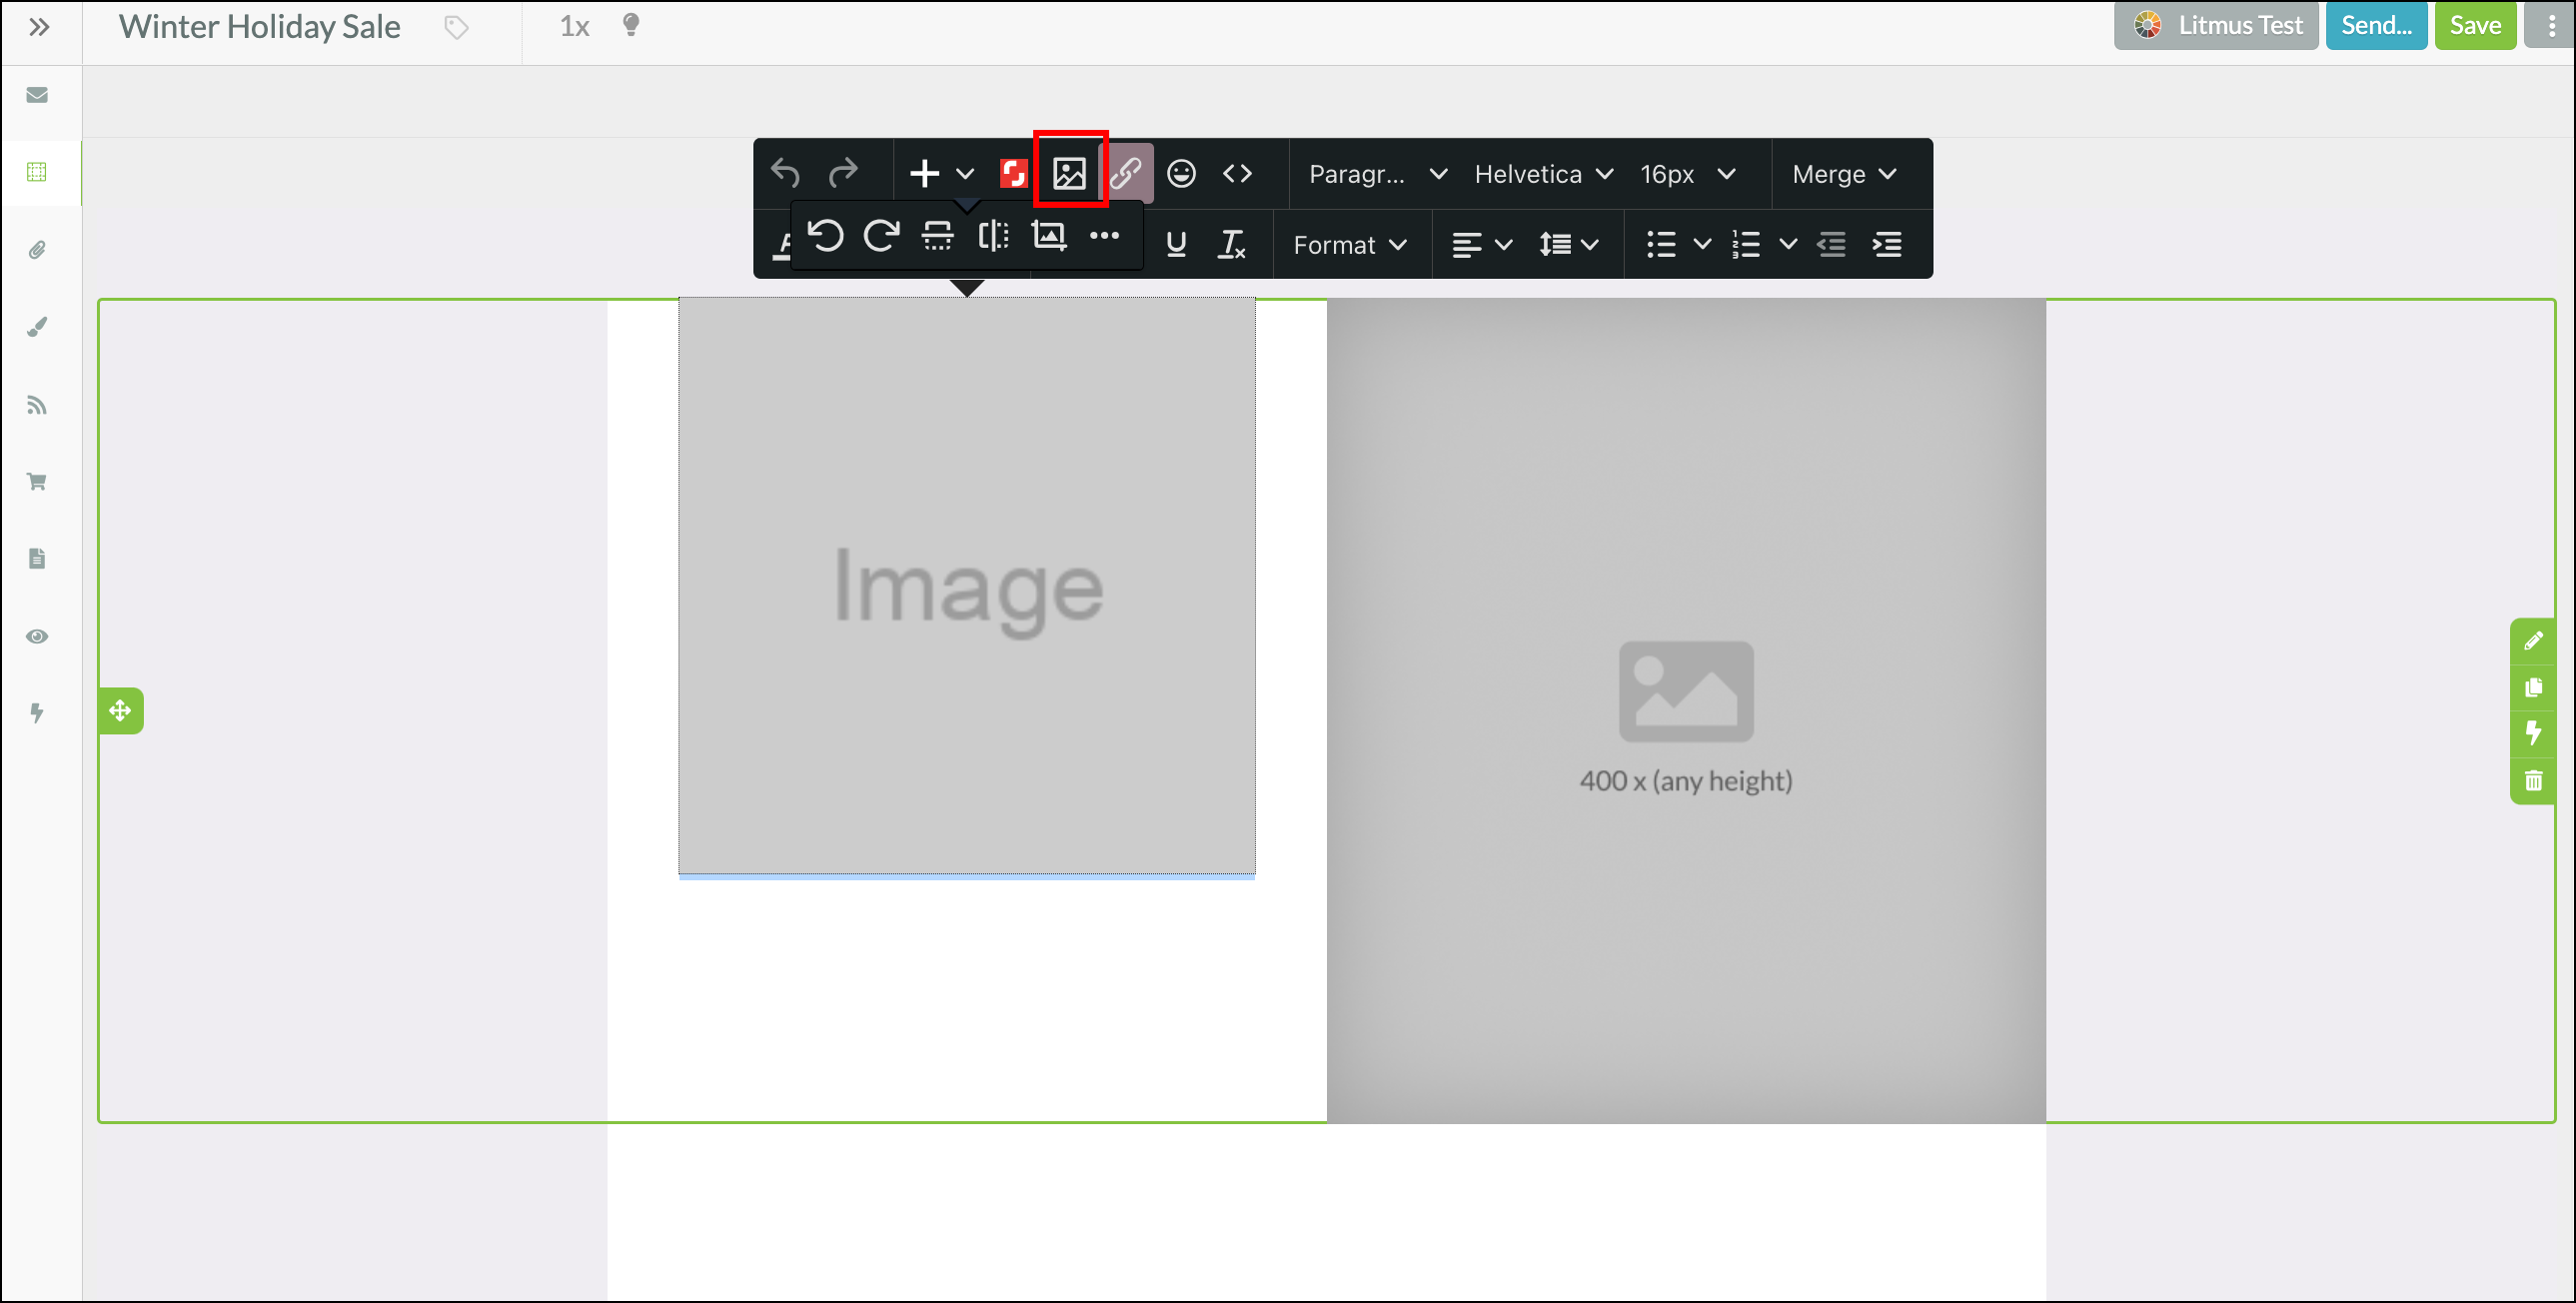 Double click the image element